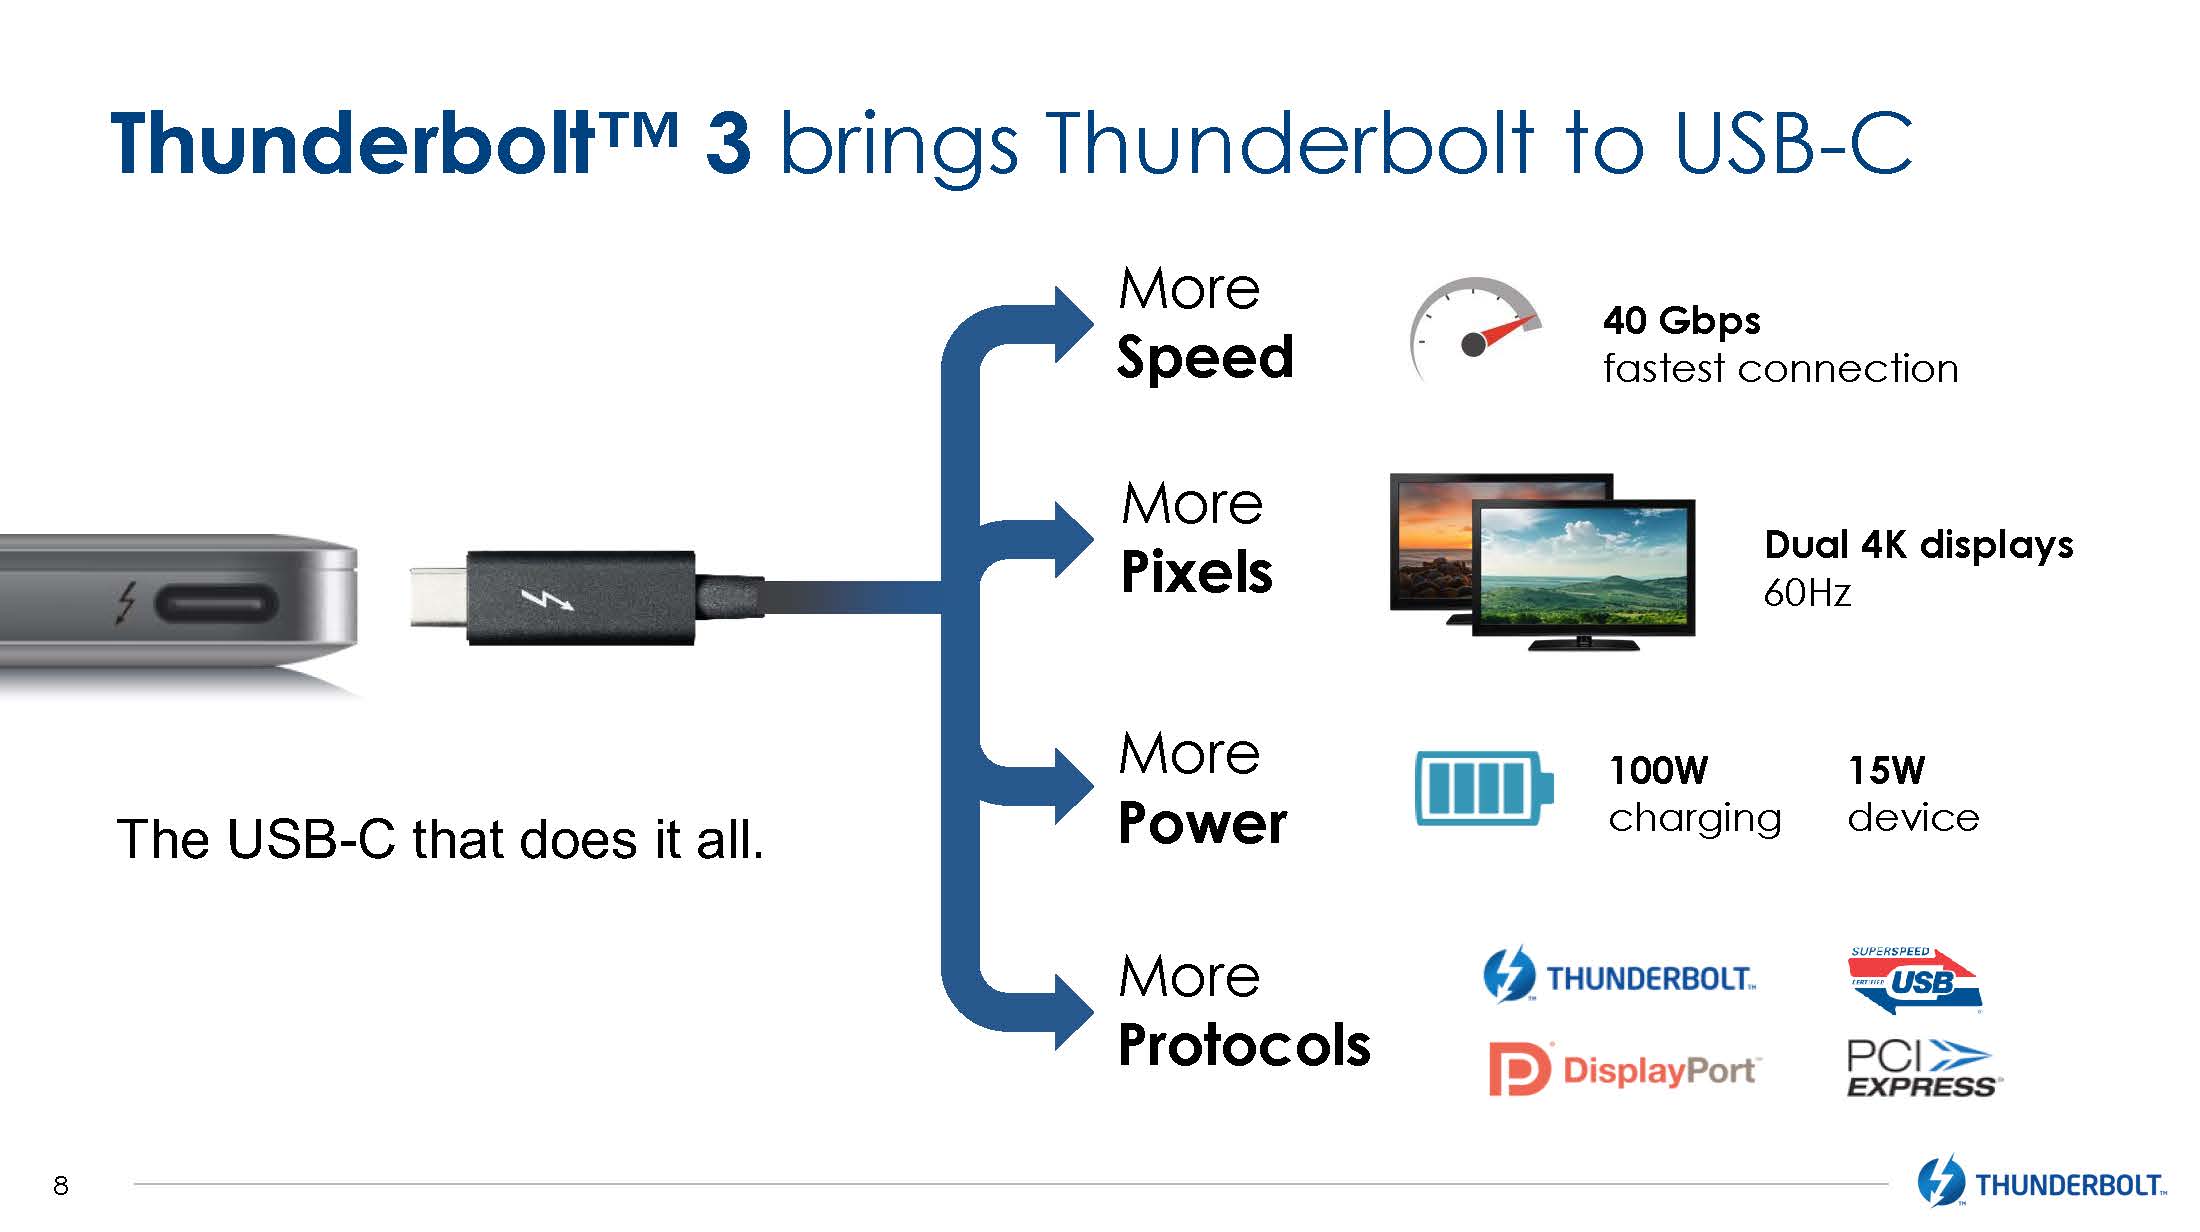 Thunderbolt 3 to Go Royalty Free, Become Natively Integrated into Future Intel CPUs